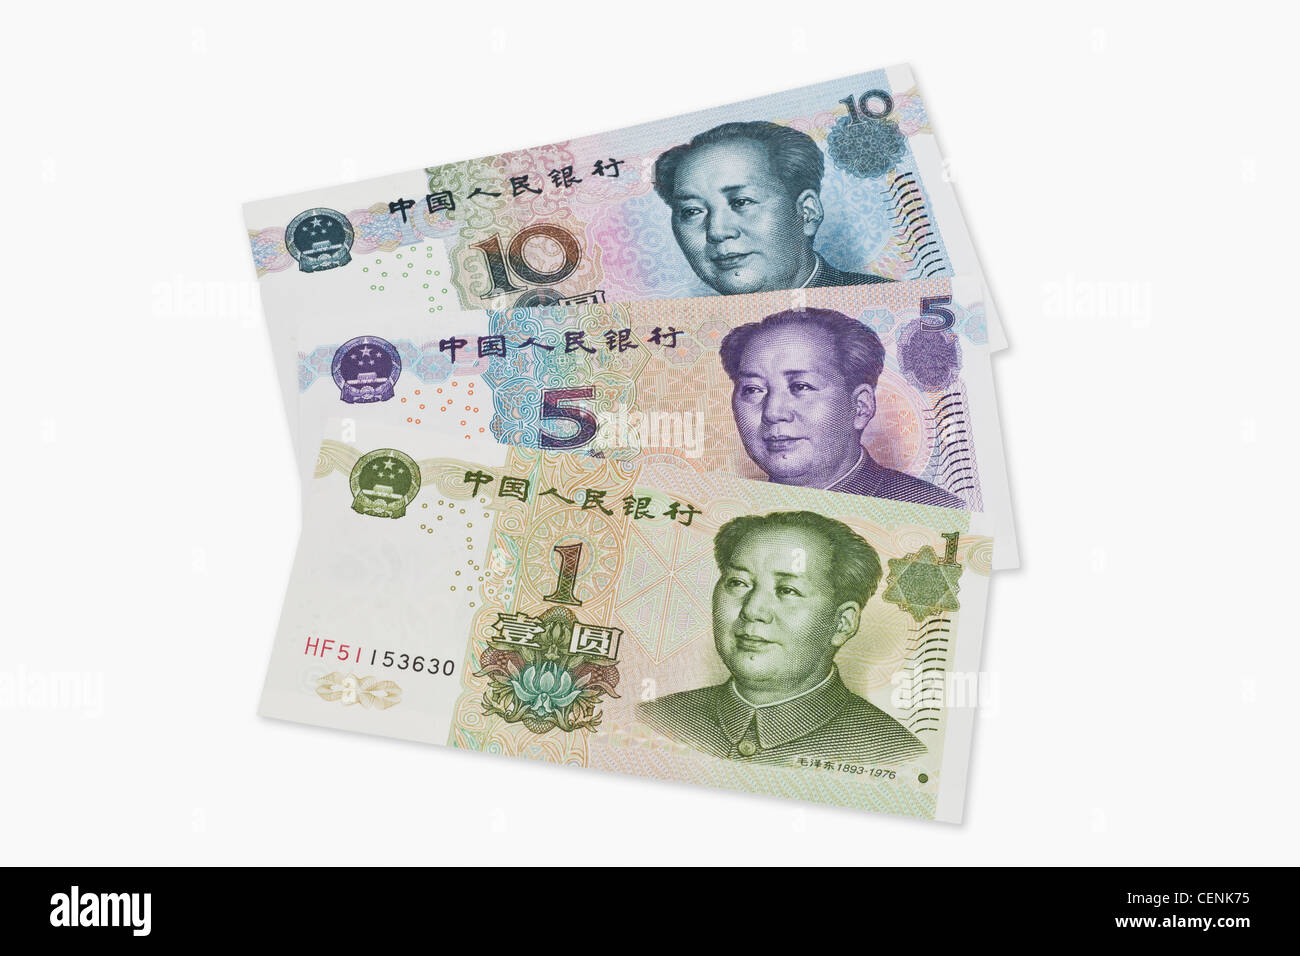 1, 5 and 10 yuan bills with the portrait of Mao Zedong. The renminbi, the Chinese currency, was introduced in 1949. Stock Photo